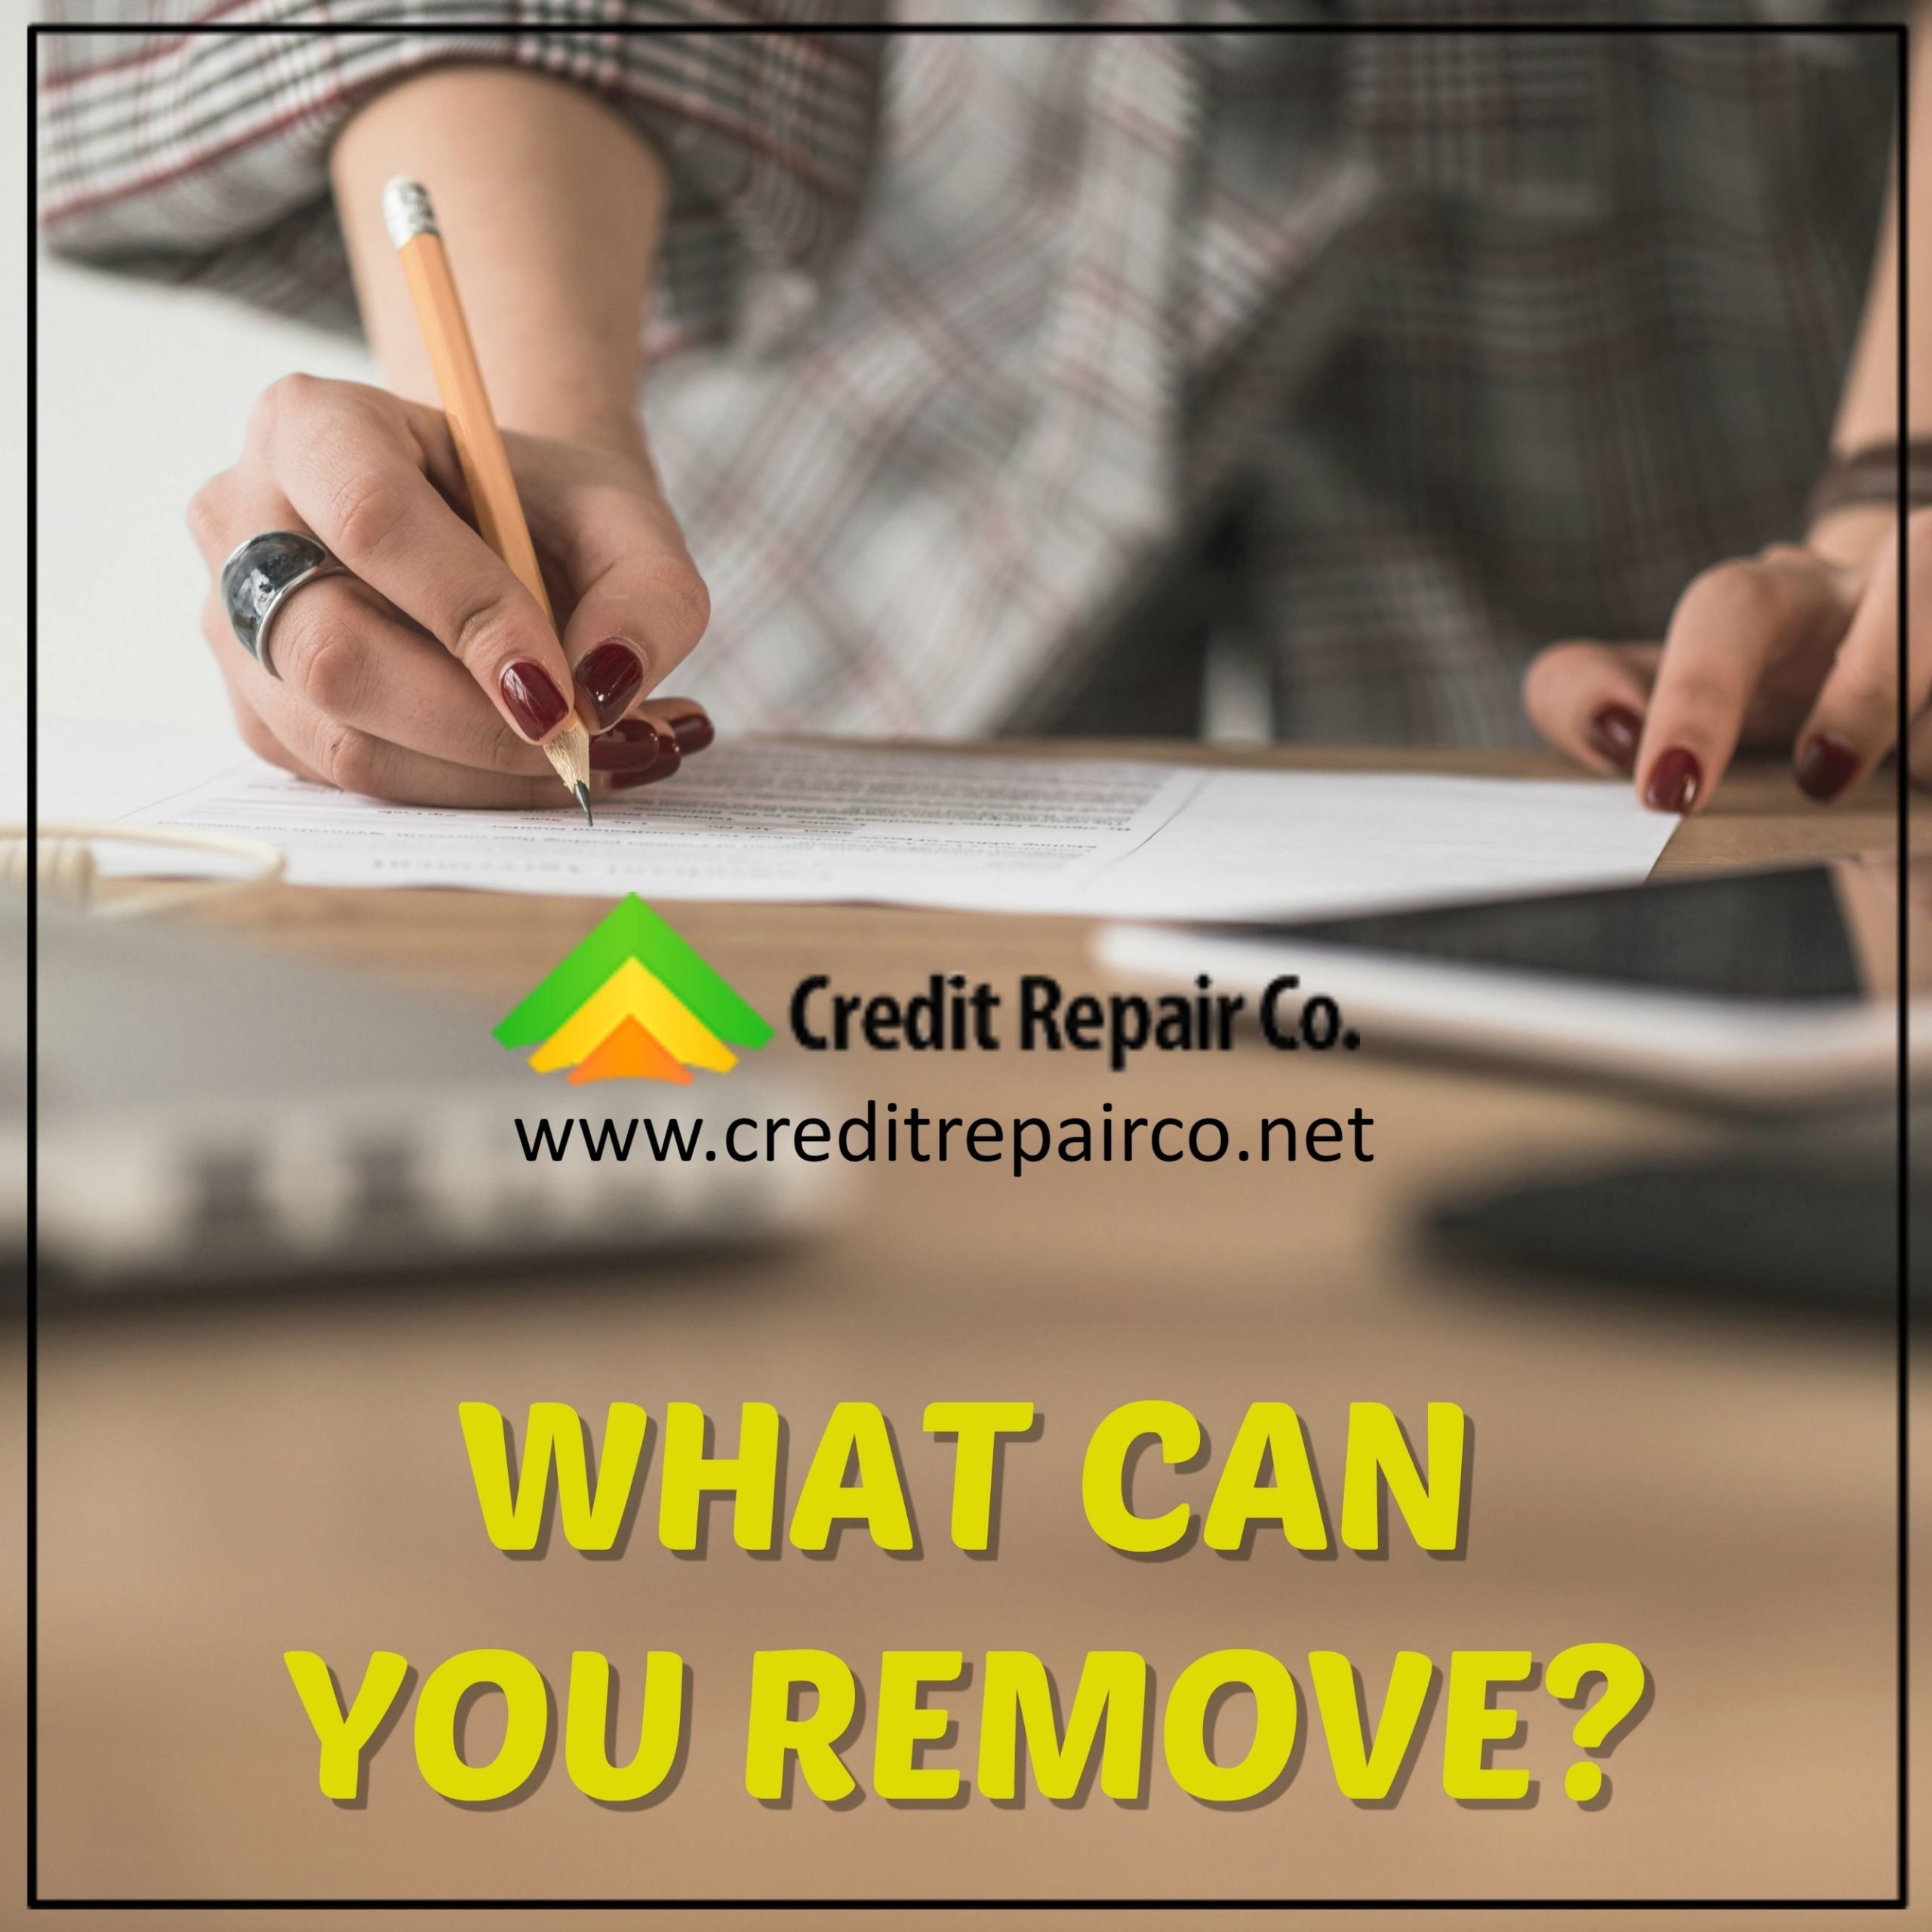 Our company can help you with your credit by removing ...